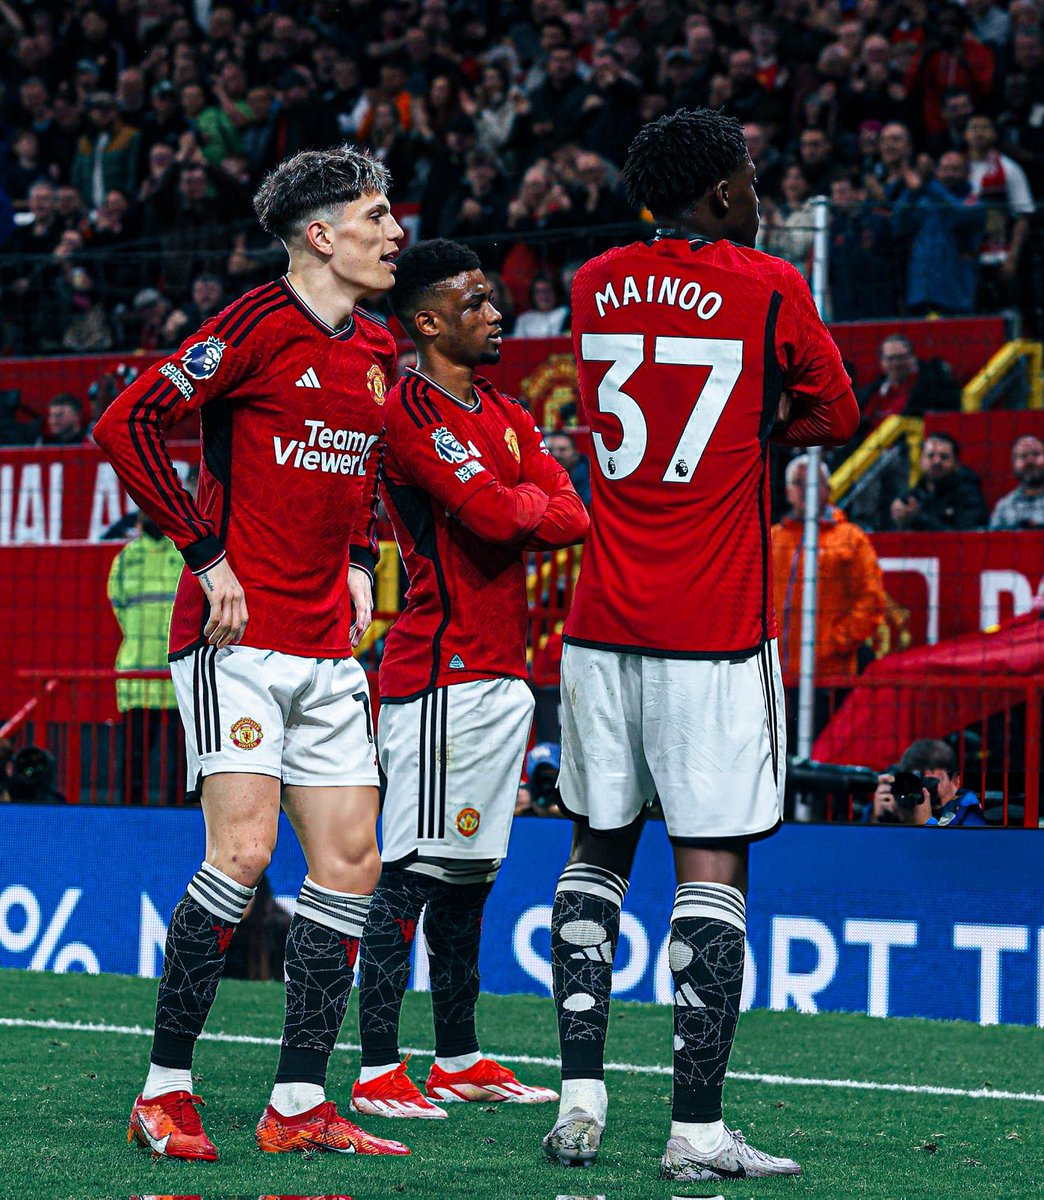 This is the future of Manchester United, likely to work out next season